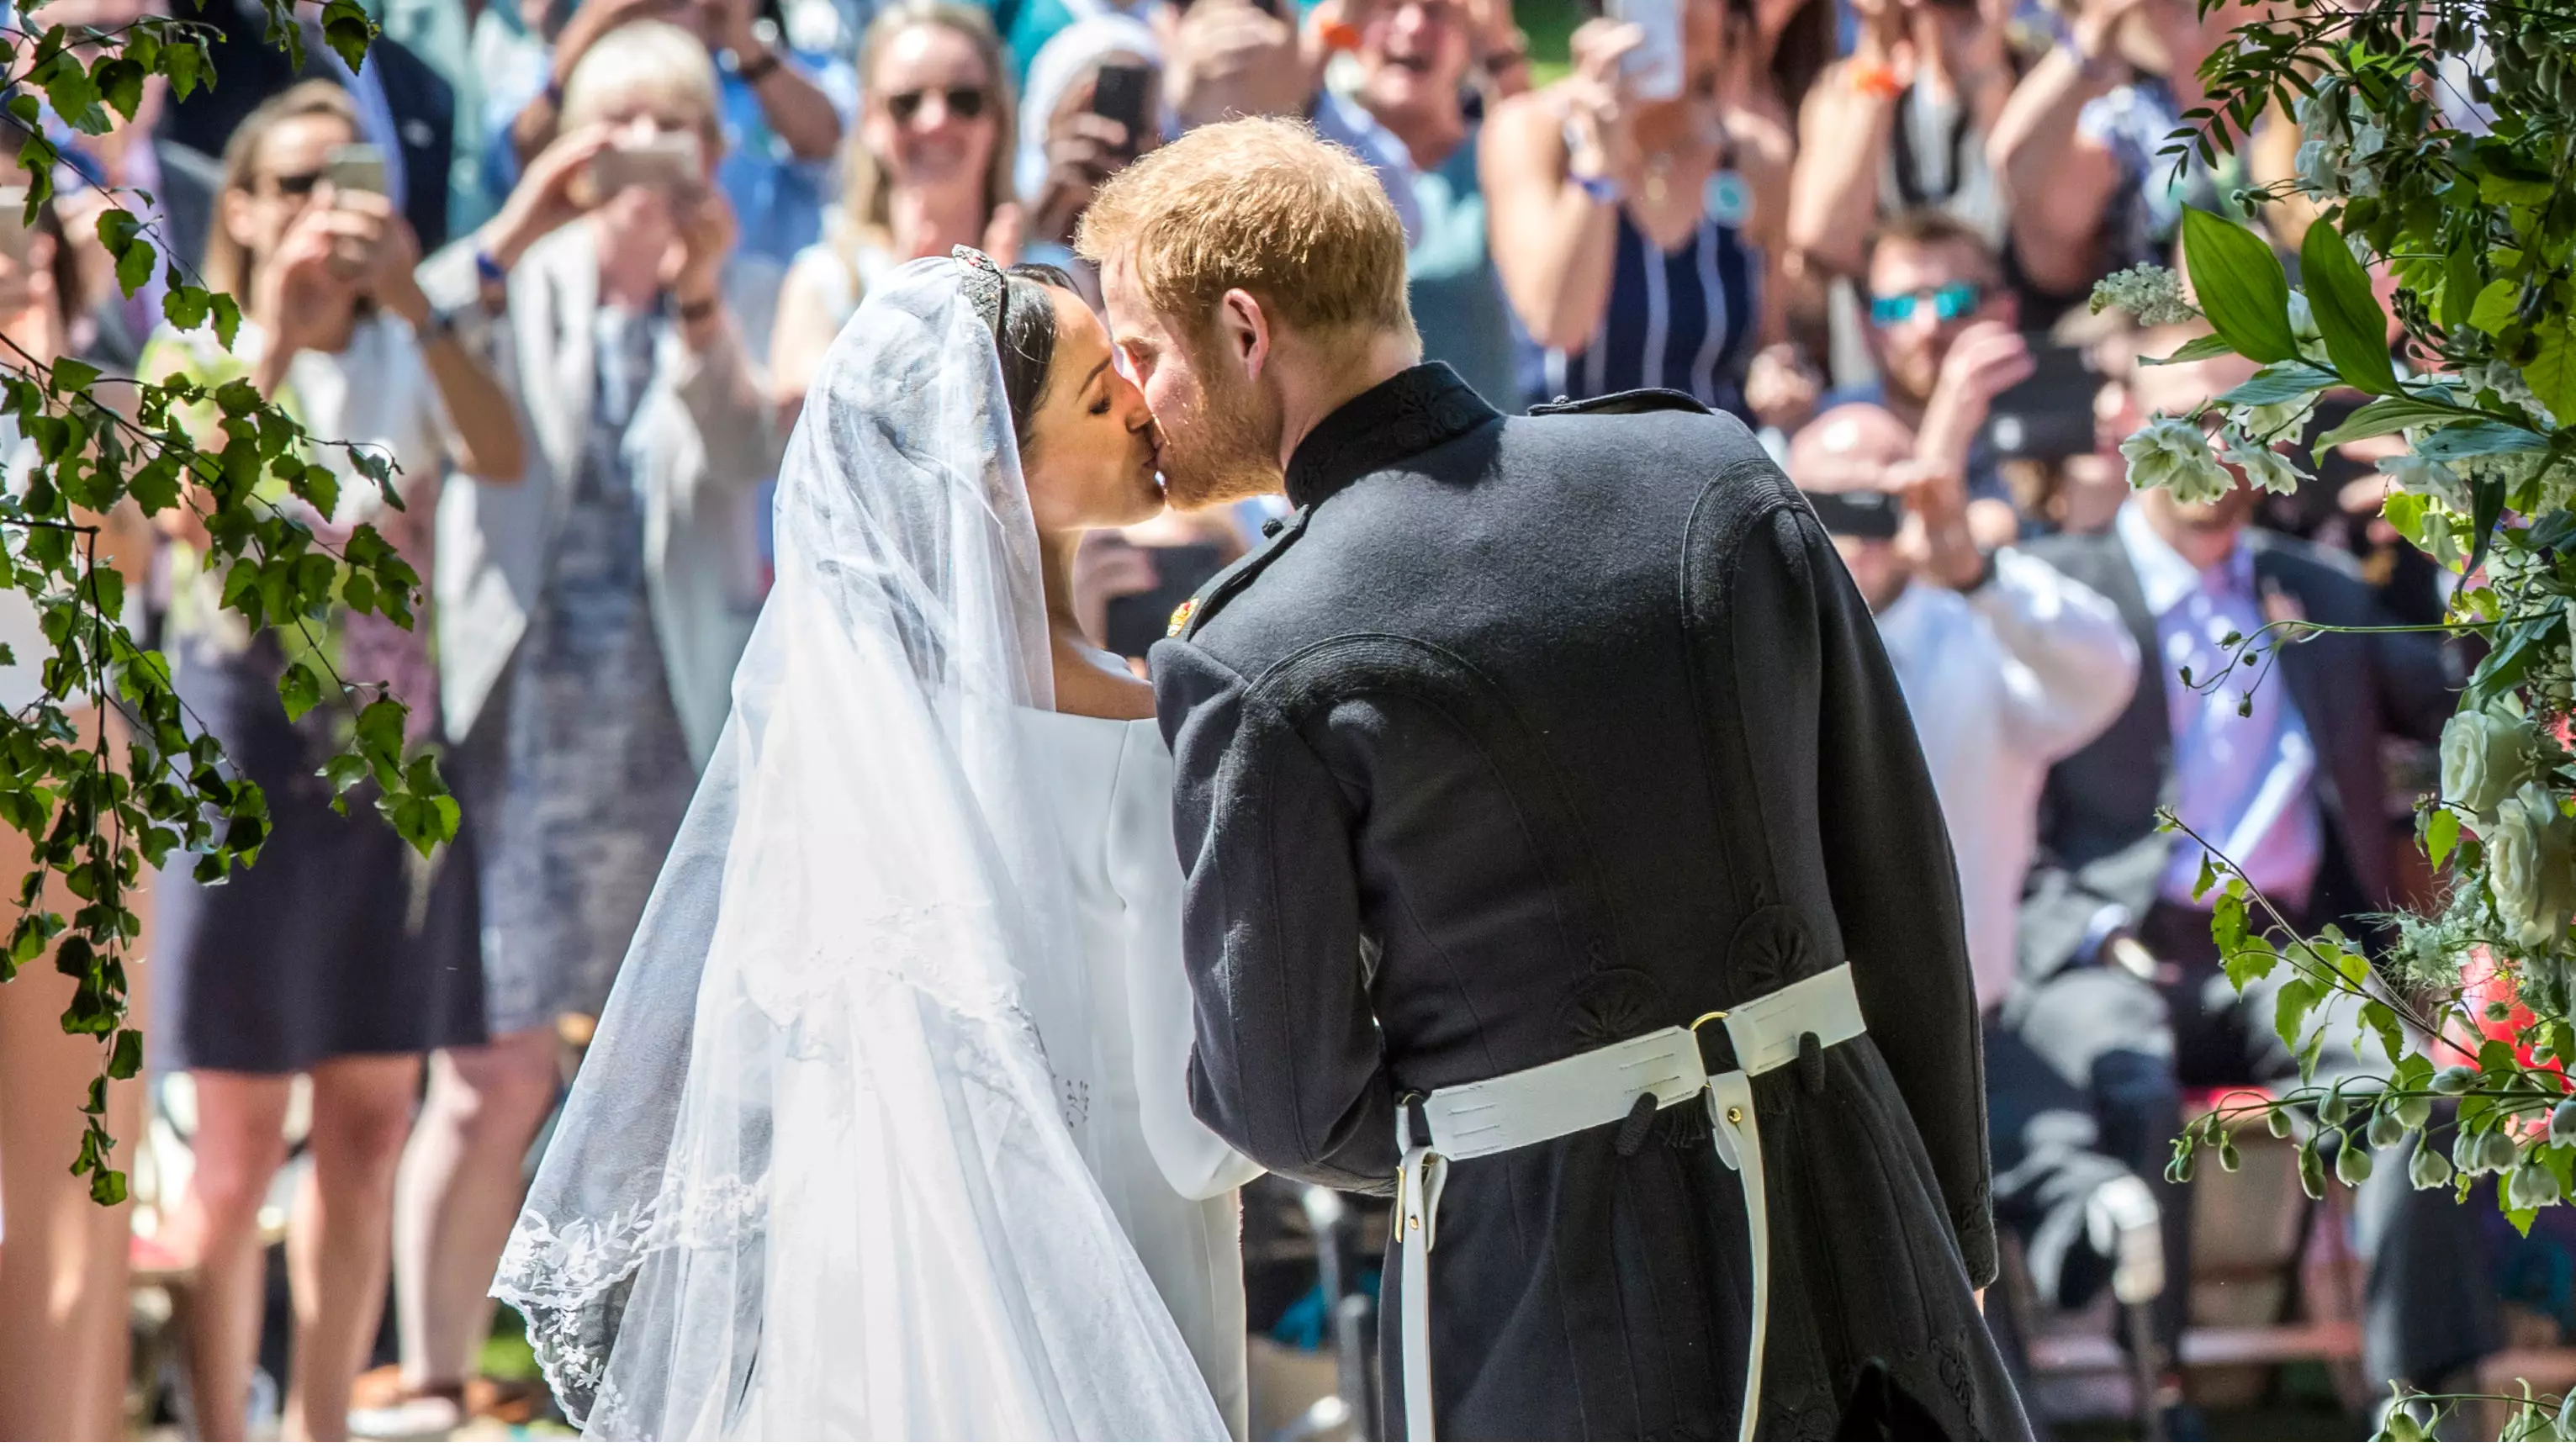 Royal Wedding 2018: Prince Harry And Meghan Markle Are Officially Married 